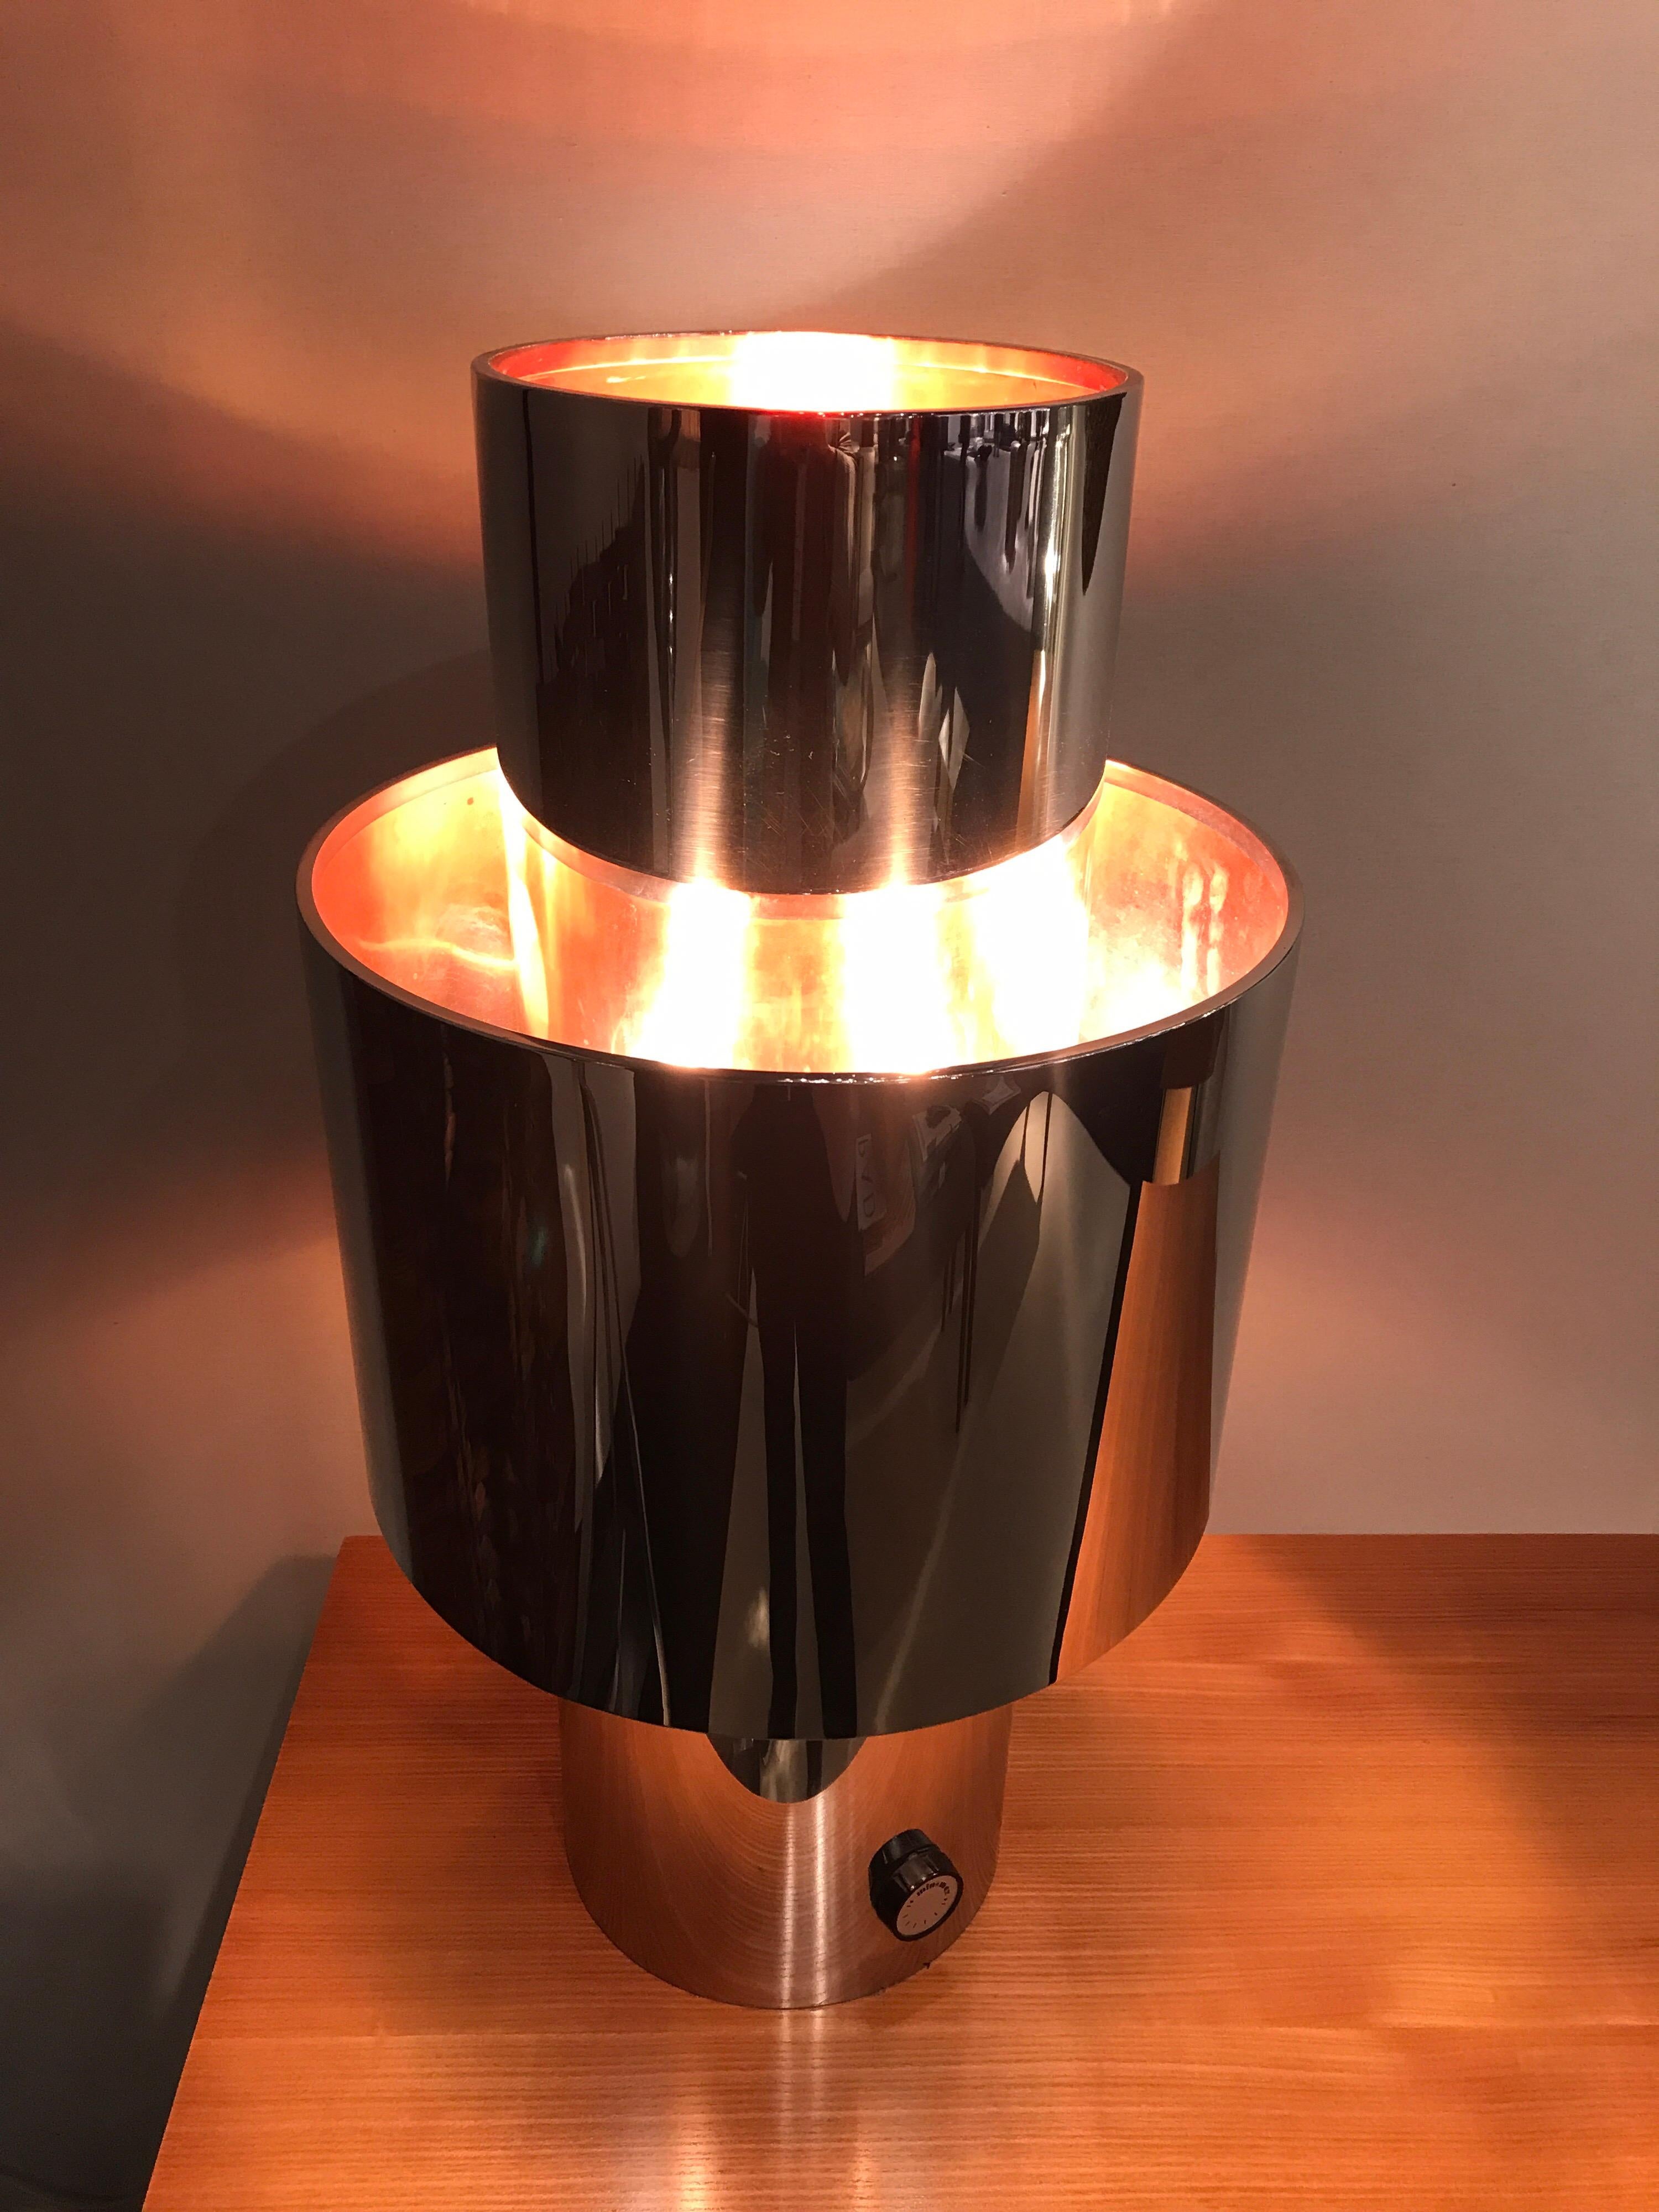 1970s chrome table lamp. Designed By Willy Rizzo
Shade interior is on cooper.
Good vintage condition 
Off/On dimes on working condition.
Lamp signed on the side.